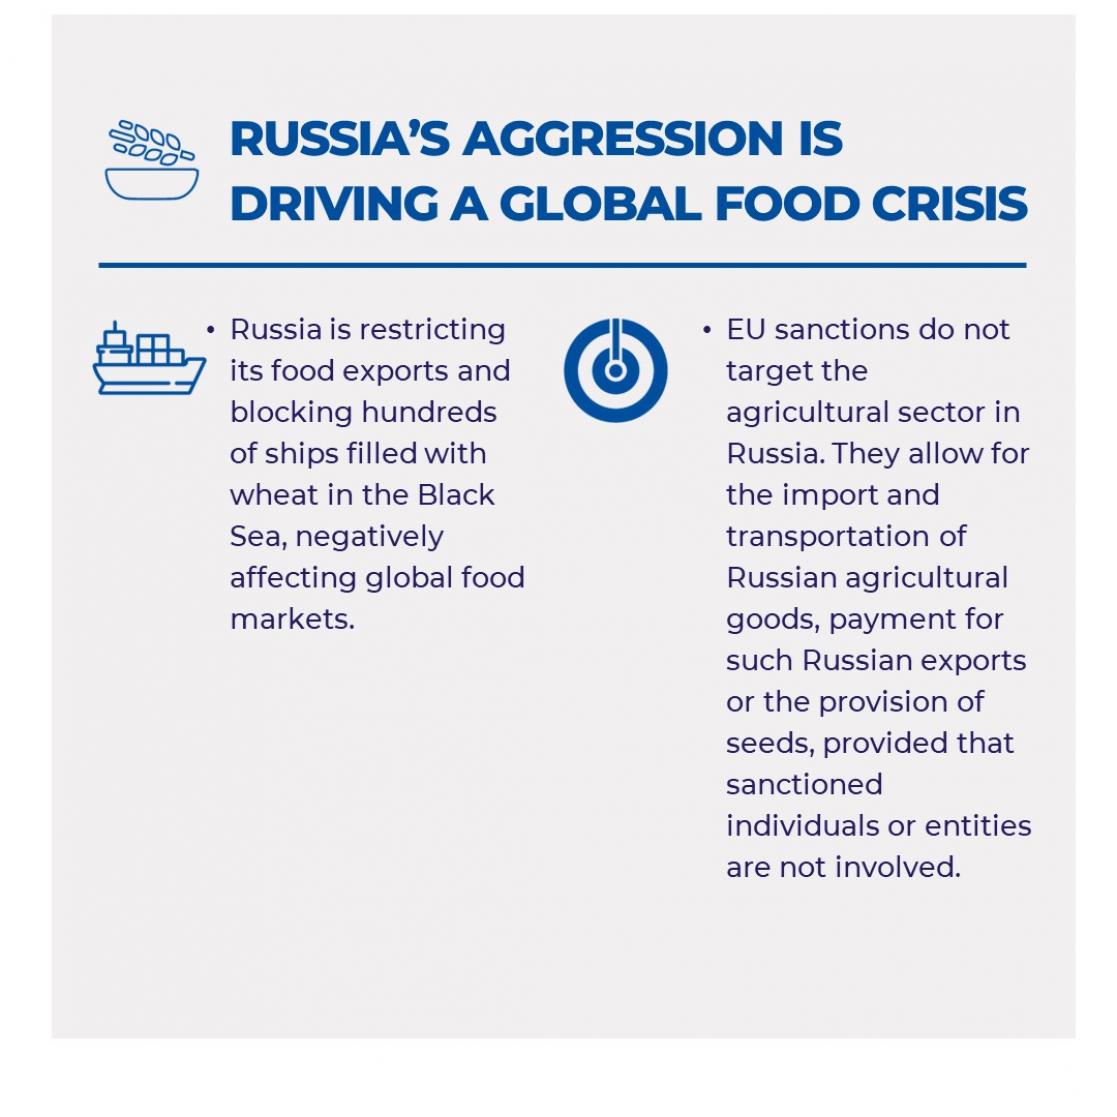 Russia's aggression is driving a global food crisis